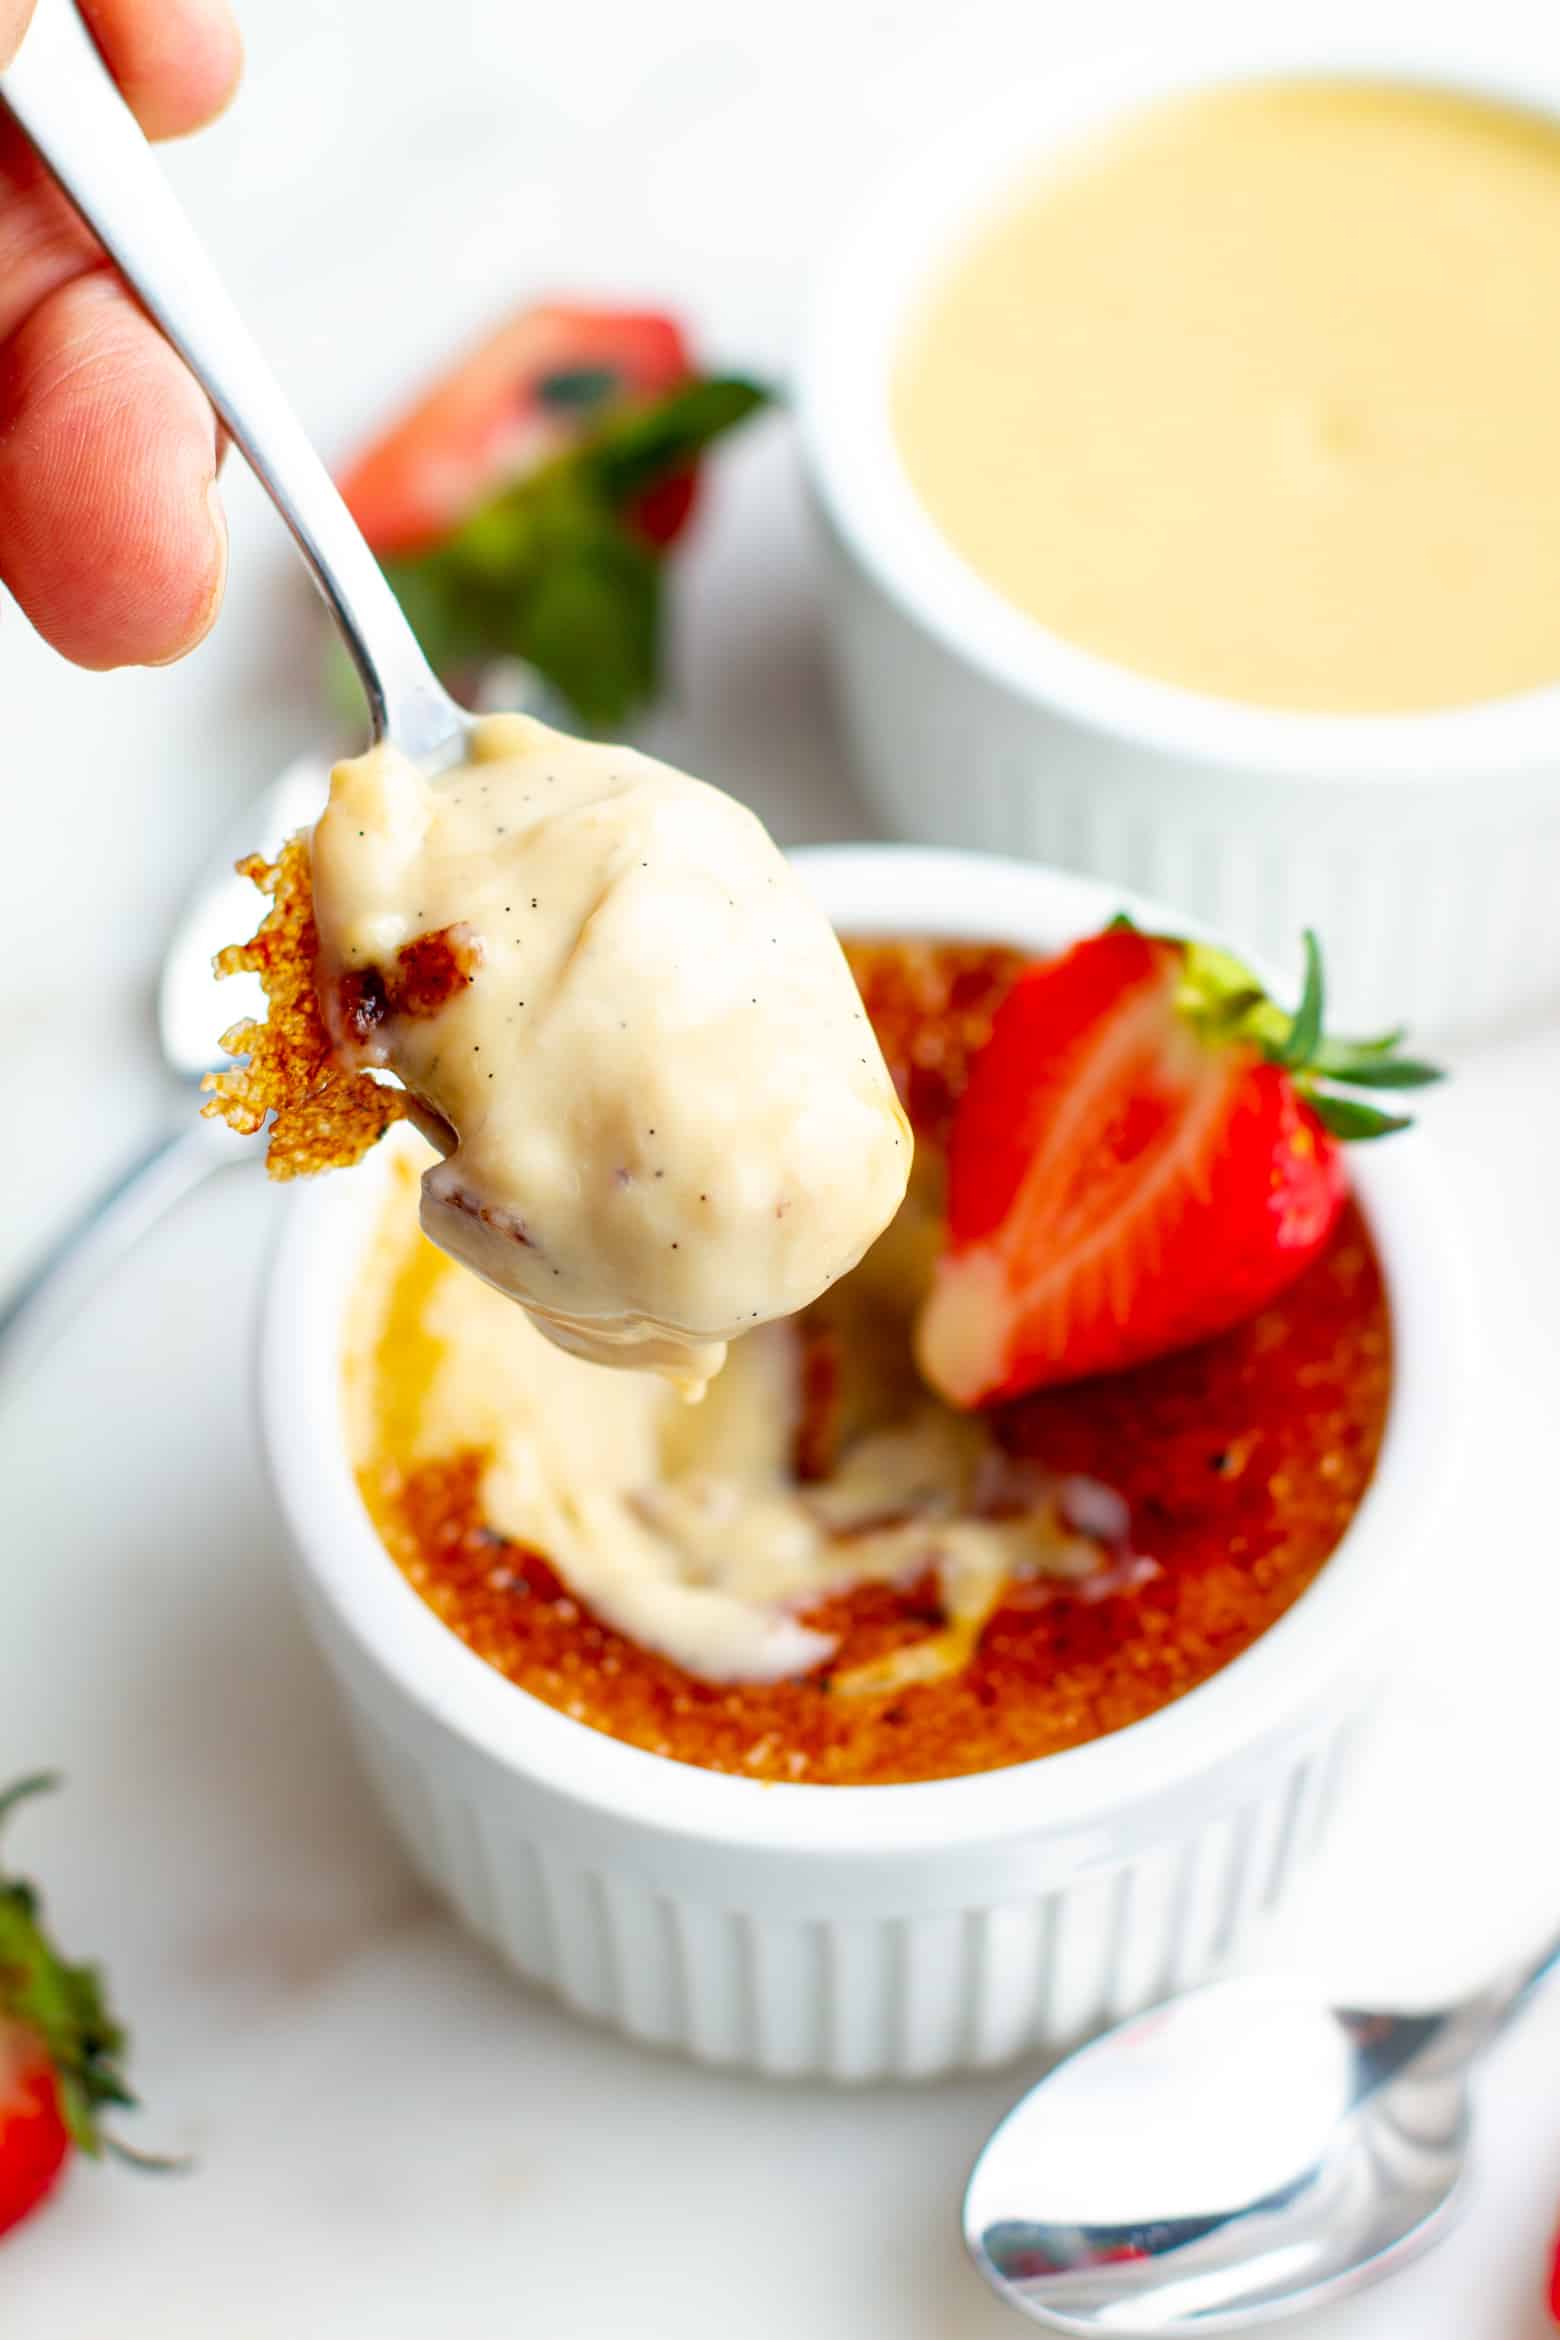 Strawberry Creme Brulee on a spoon.